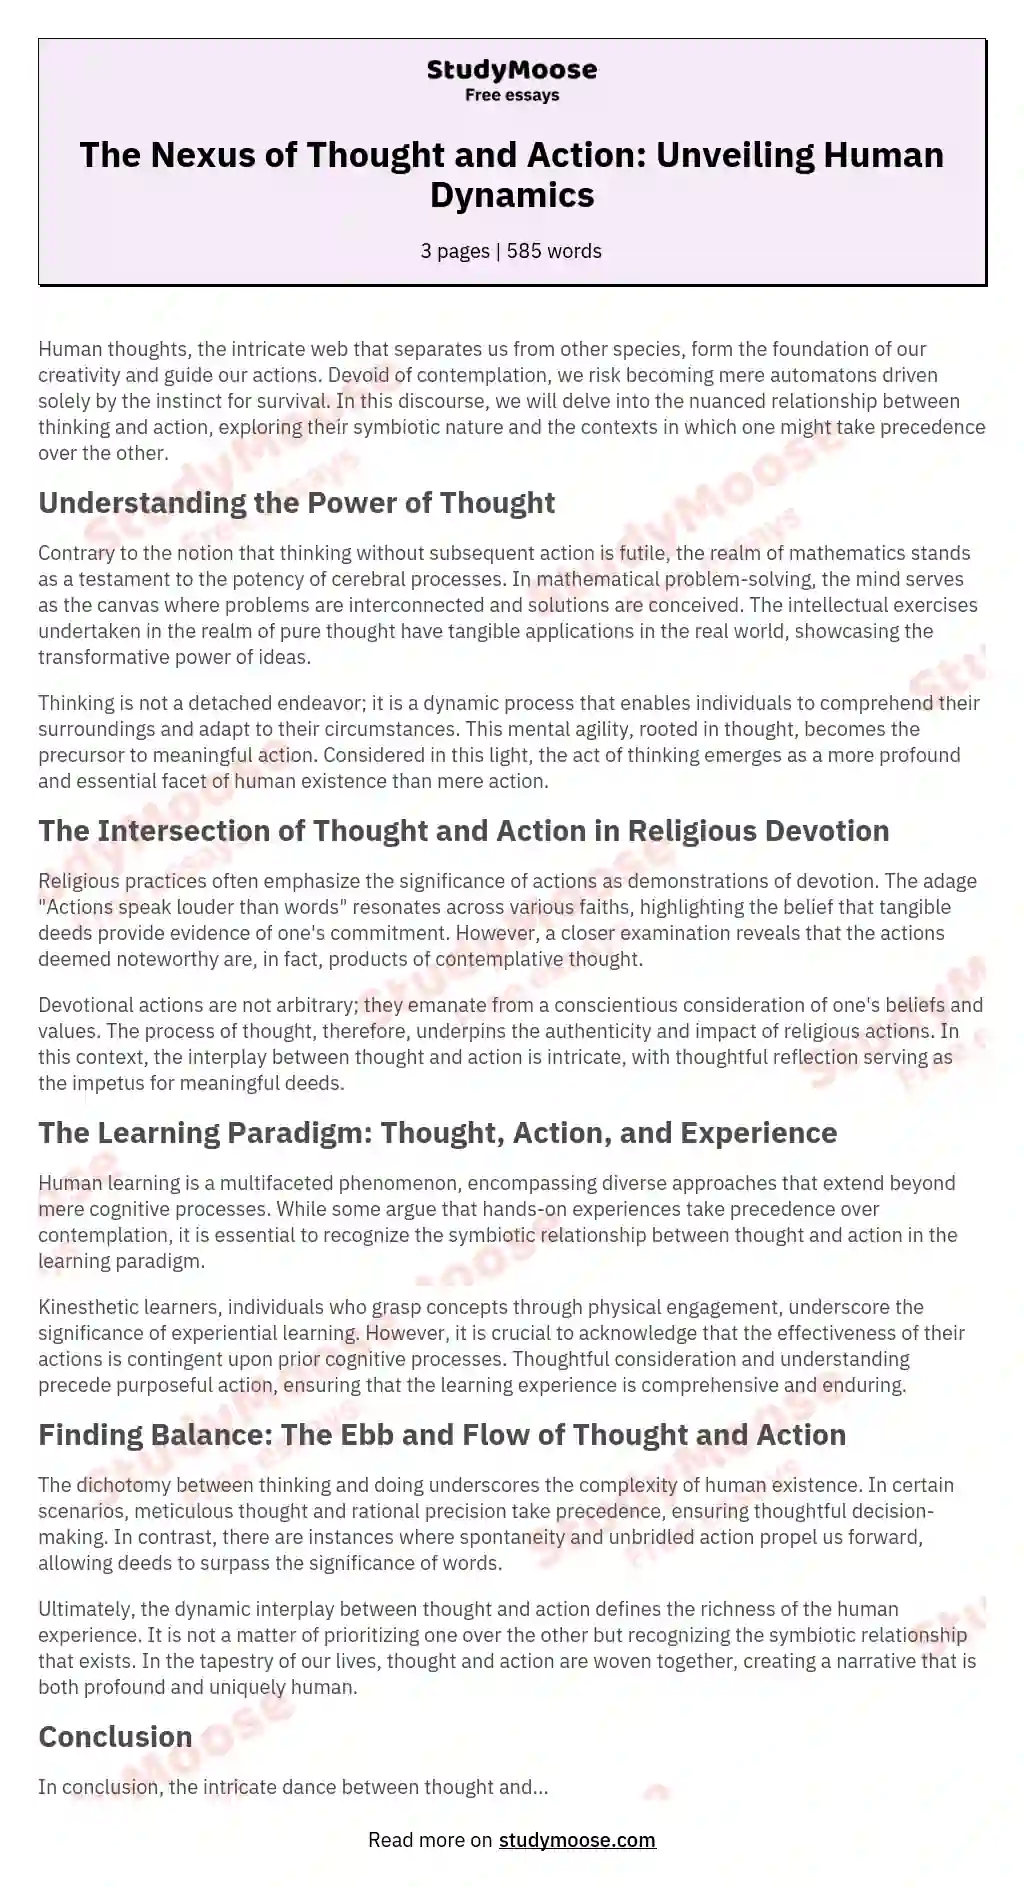 The Nexus of Thought and Action: Unveiling Human Dynamics essay